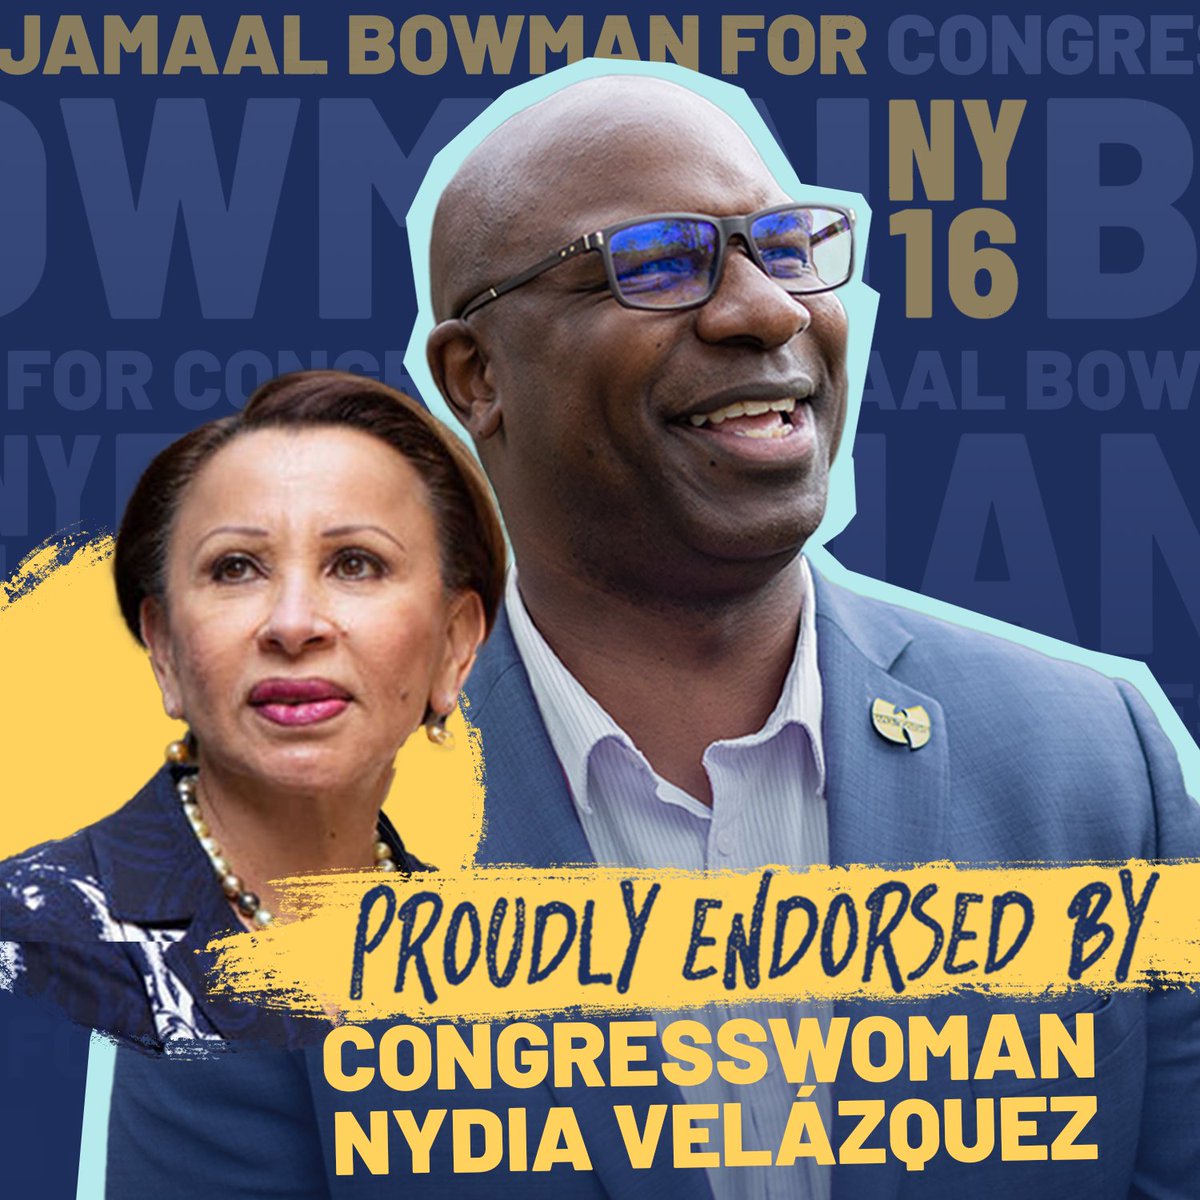 Honored to once again be endorsed by Congresswoman Nydia Velázquez. Rep. Velázquez has continued to push for affordable housing, stand up for immigrants, and protect abortion rights - she never stops fighting for New Yorkers. I’m proud to be with her in this fight.